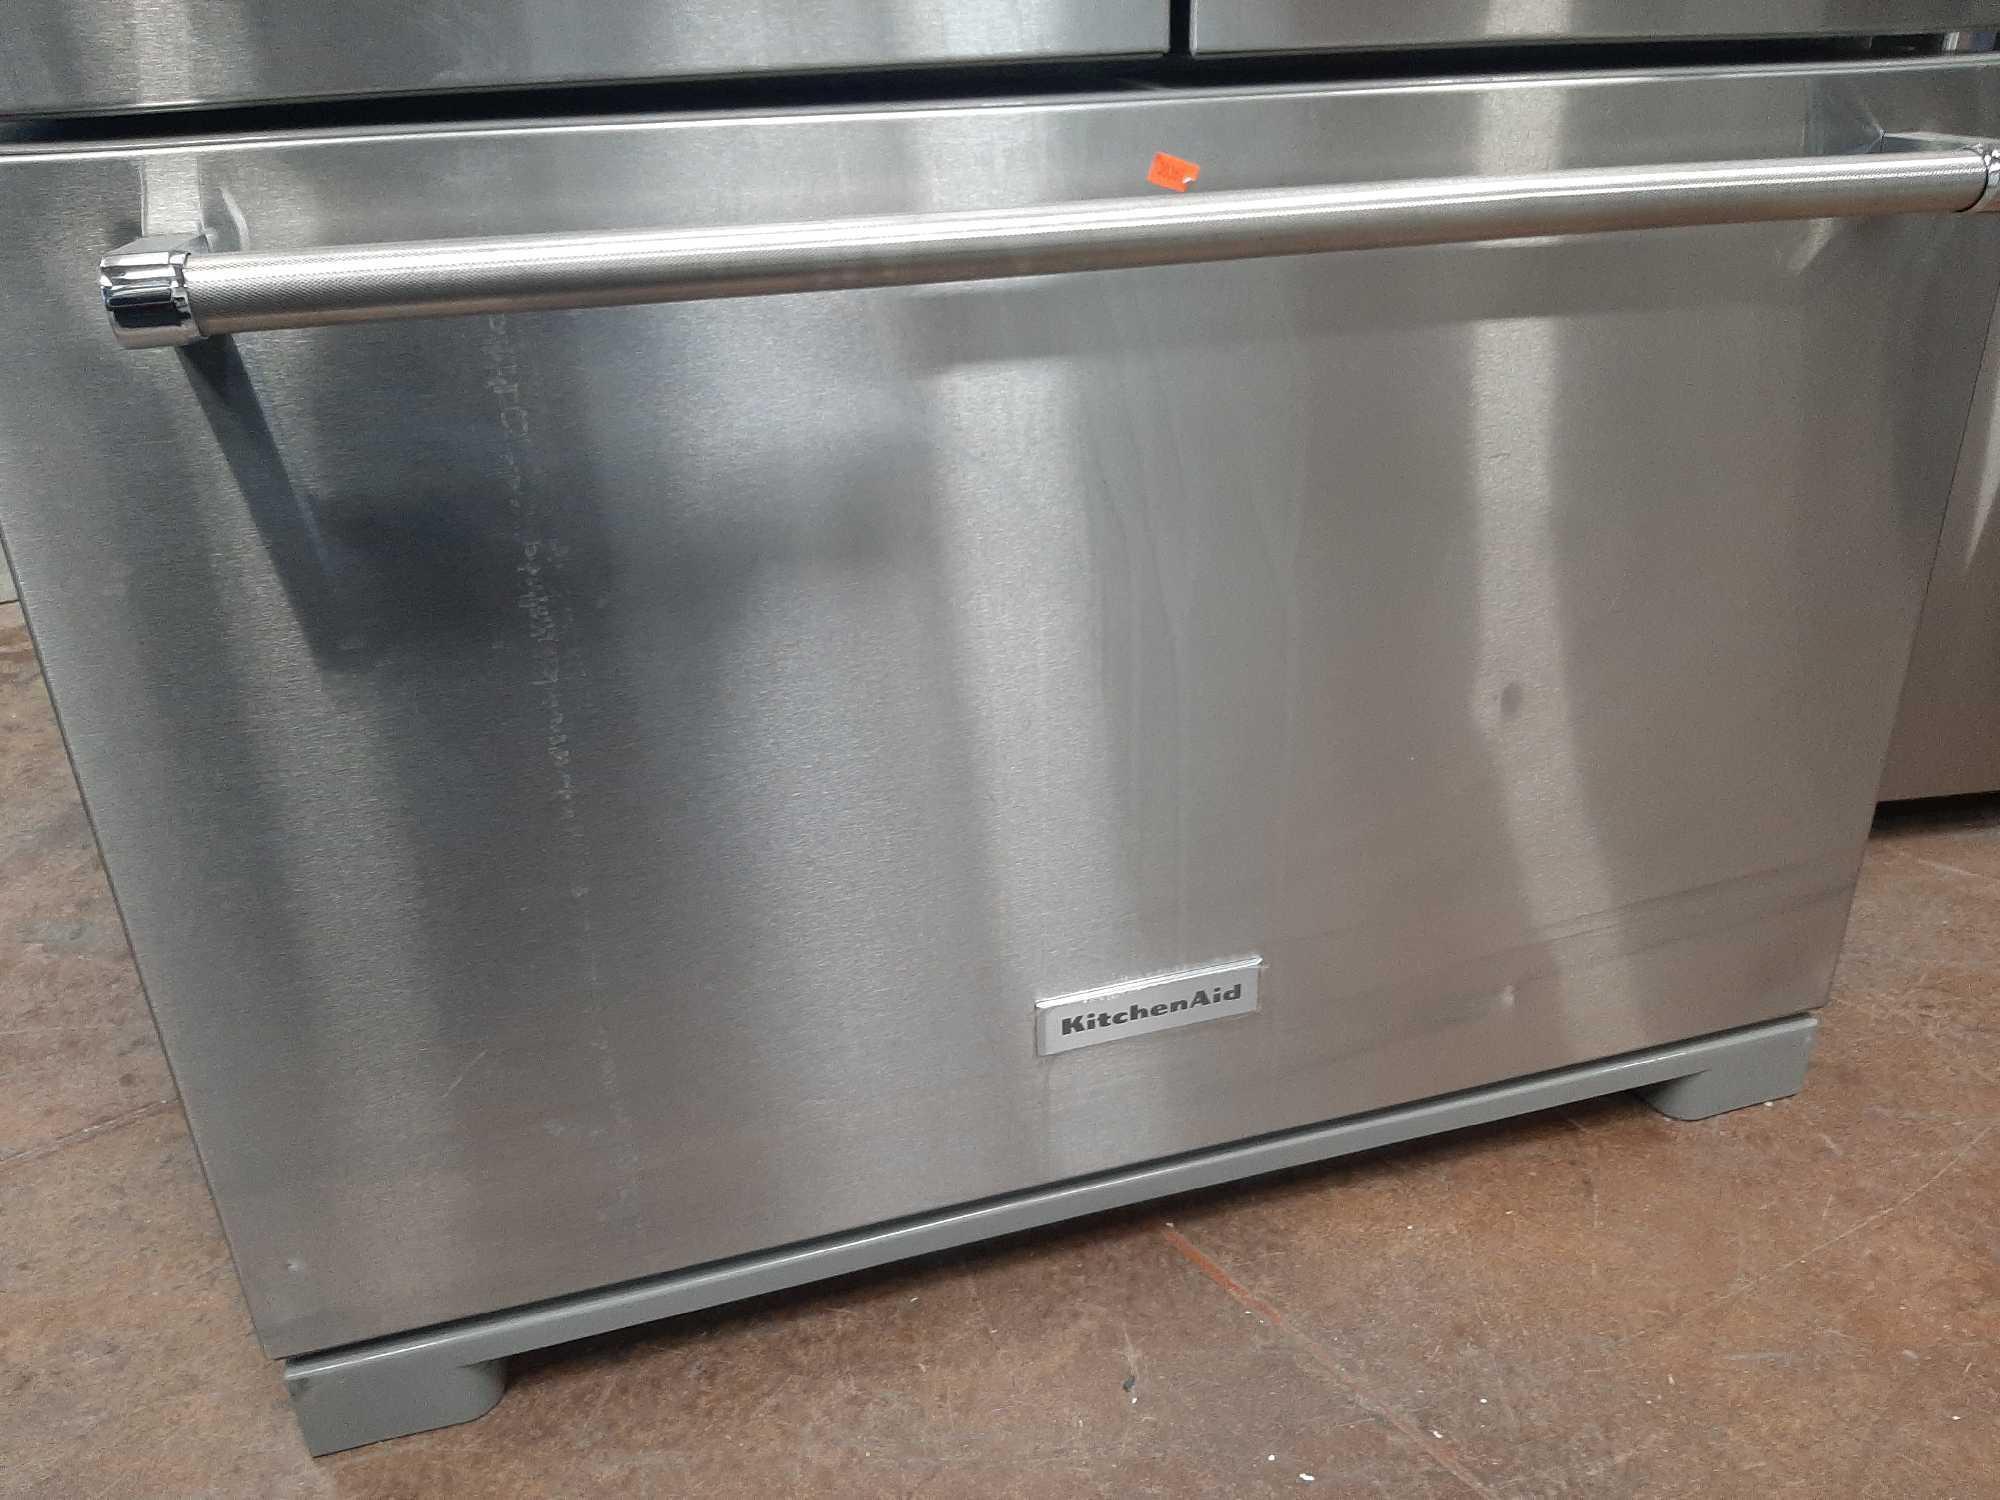 KitchenAid 25.8 cu. ft. 5 Door French Door Refrigerator*COLD*PREVIOUSLY INSTALLED*